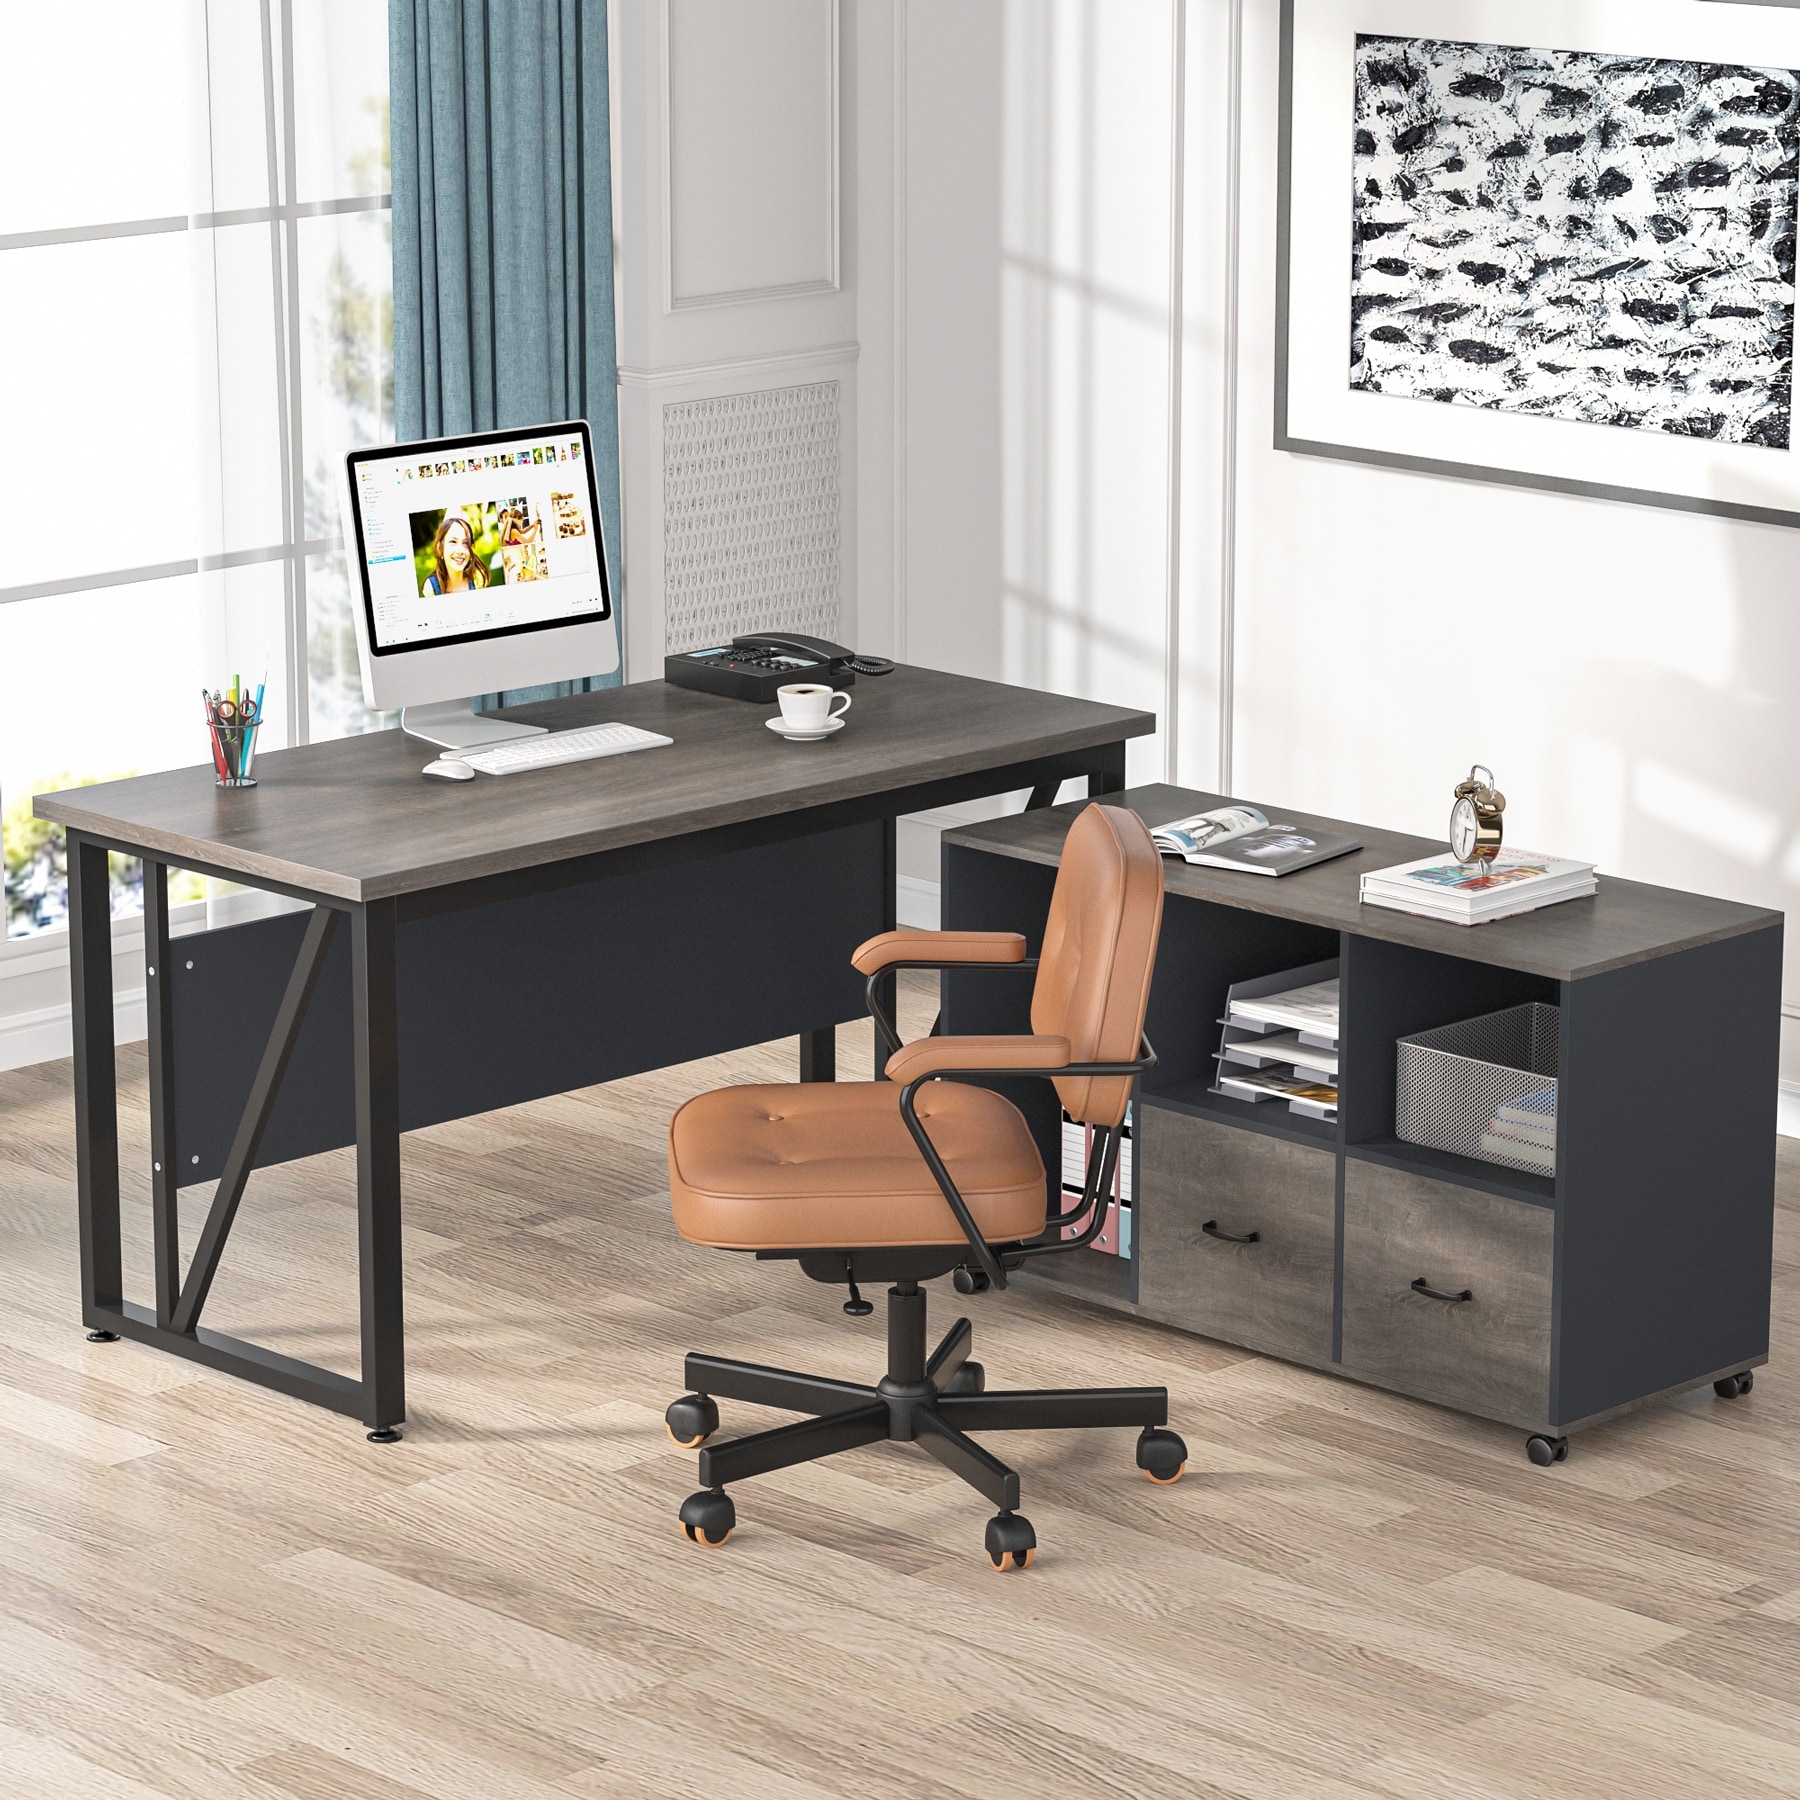 https://ak1.ostkcdn.com/images/products/is/images/direct/22309ca5649d41edaeae9fca6bec6041574ae355/L-Shaped-Computer-Desk%2C-55-inches-Executive-Desk-with-lateral-File-Cabinet.jpg